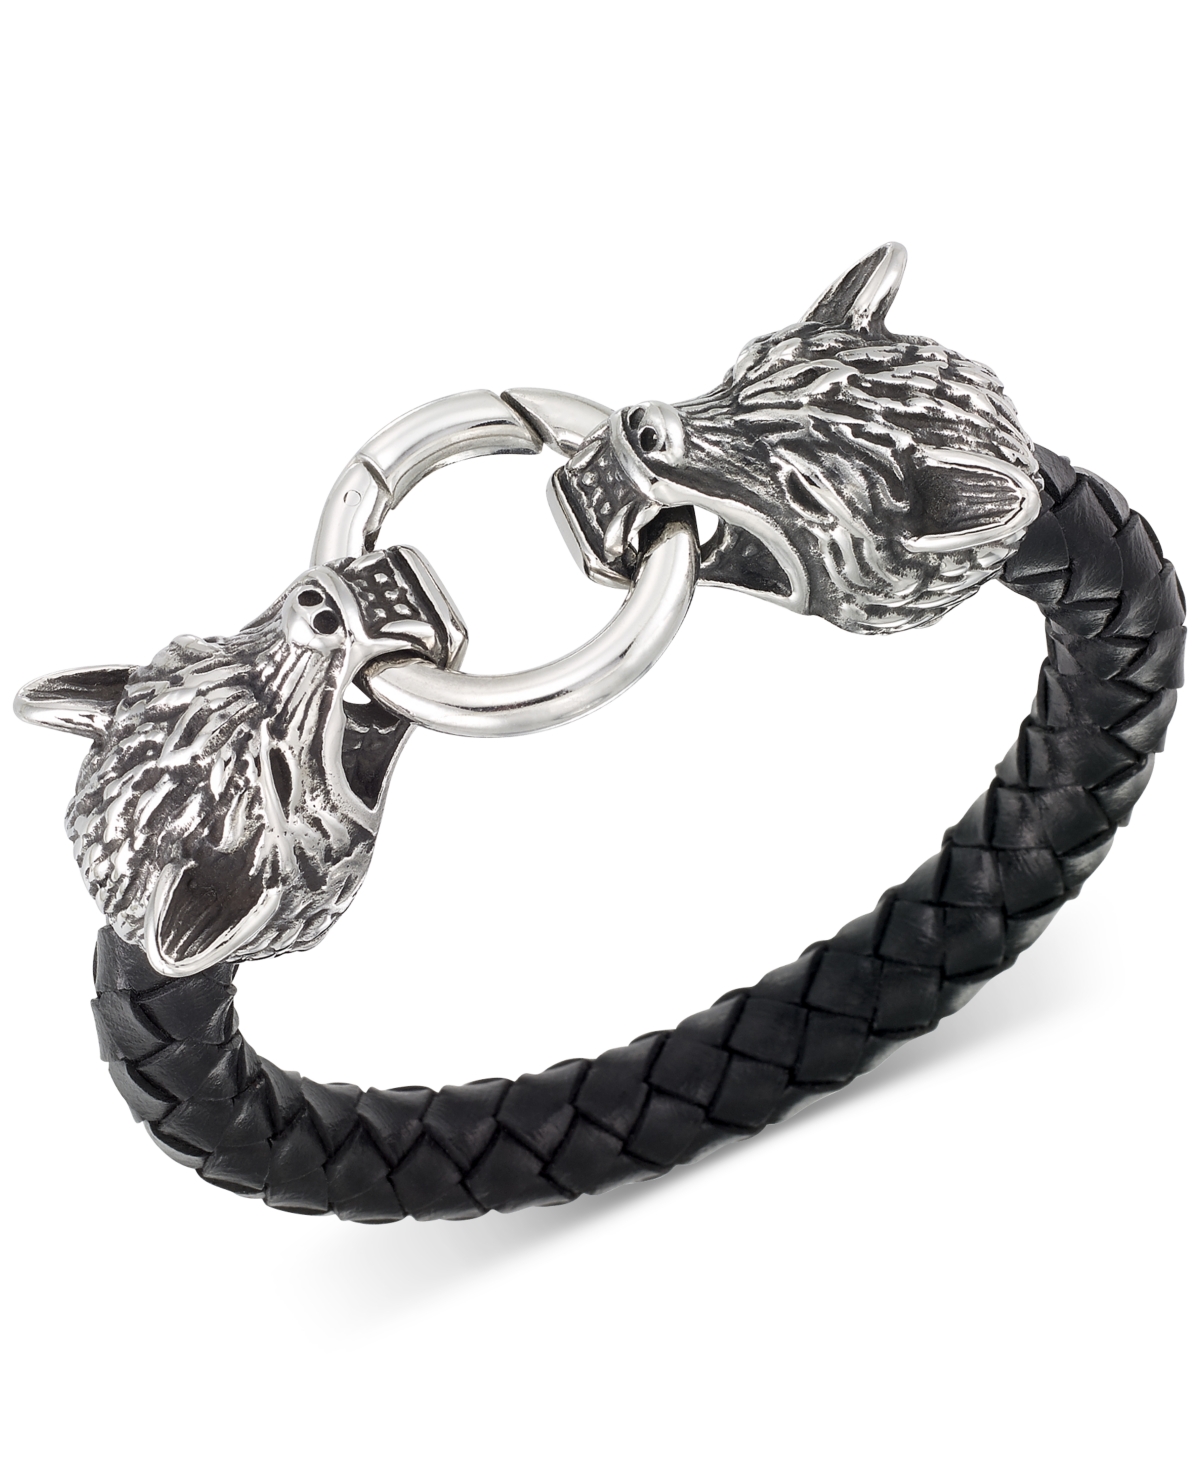 Smith Wolf Head Leather Braided Bracelet in Stainless Steel - Stainless Steel